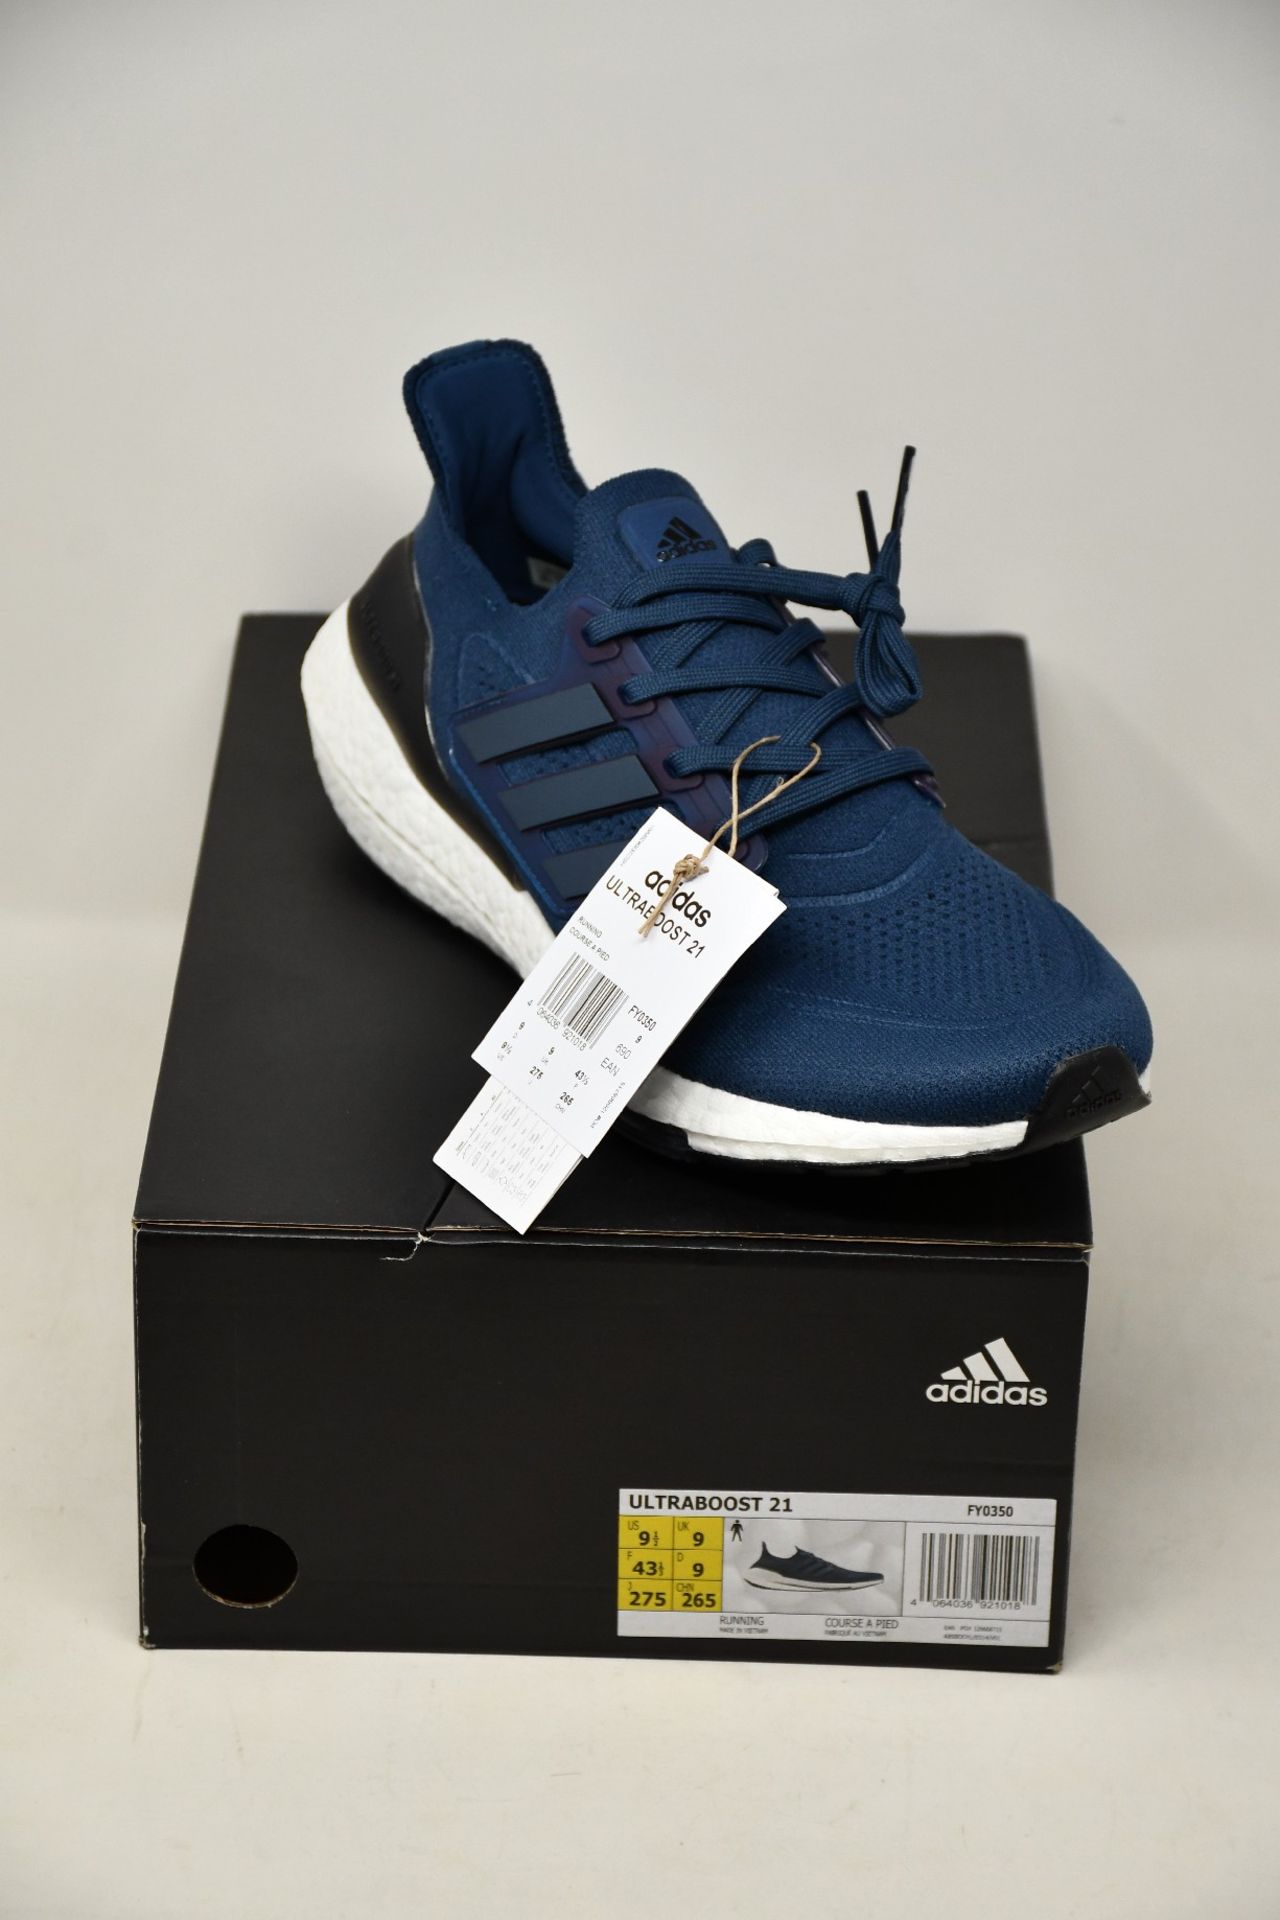 A pair of as new Adidas Ultraboost 21 (UK 9).